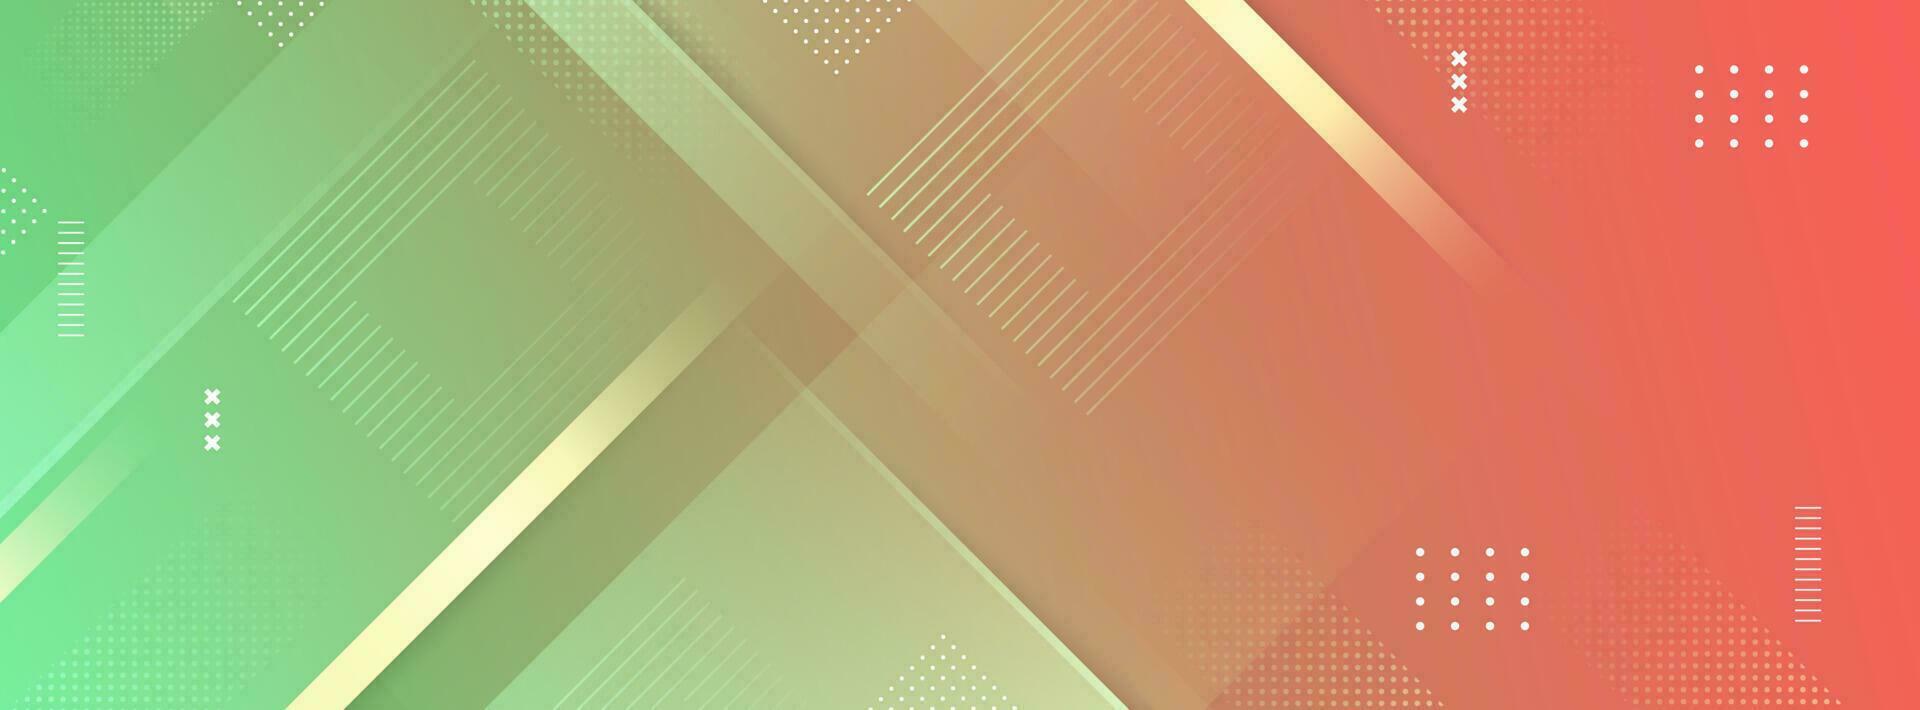 banner background. full color, green gradation and red.geometric ,elegant and clean.business ,etc. eps 10 vector